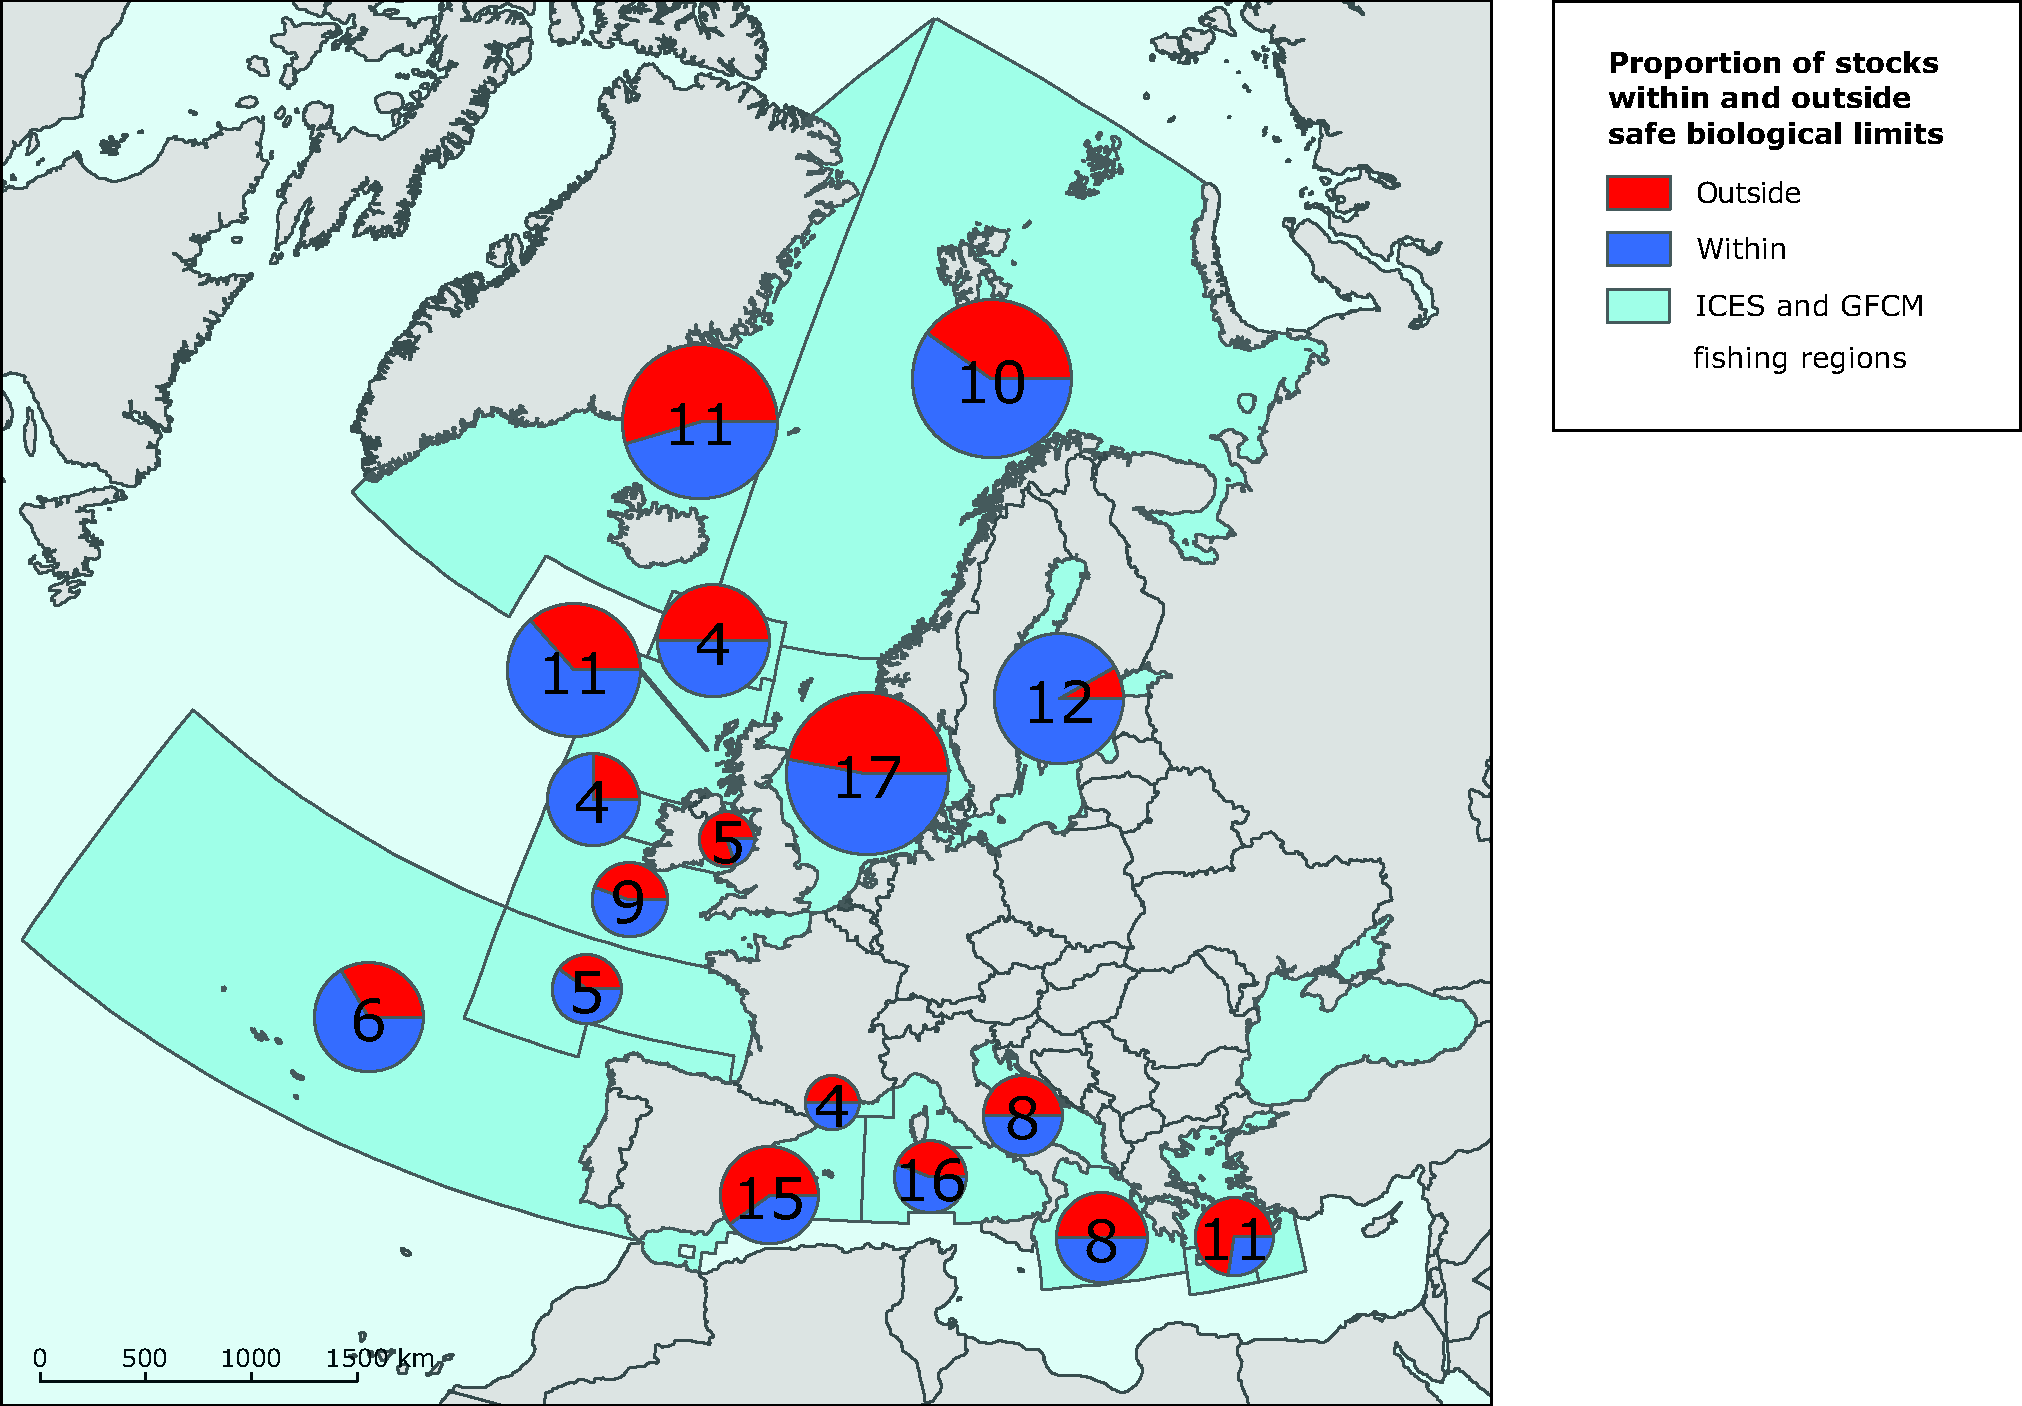 Status of the fish stocks in ICES and GFCM fishing regions of Europe in 2006